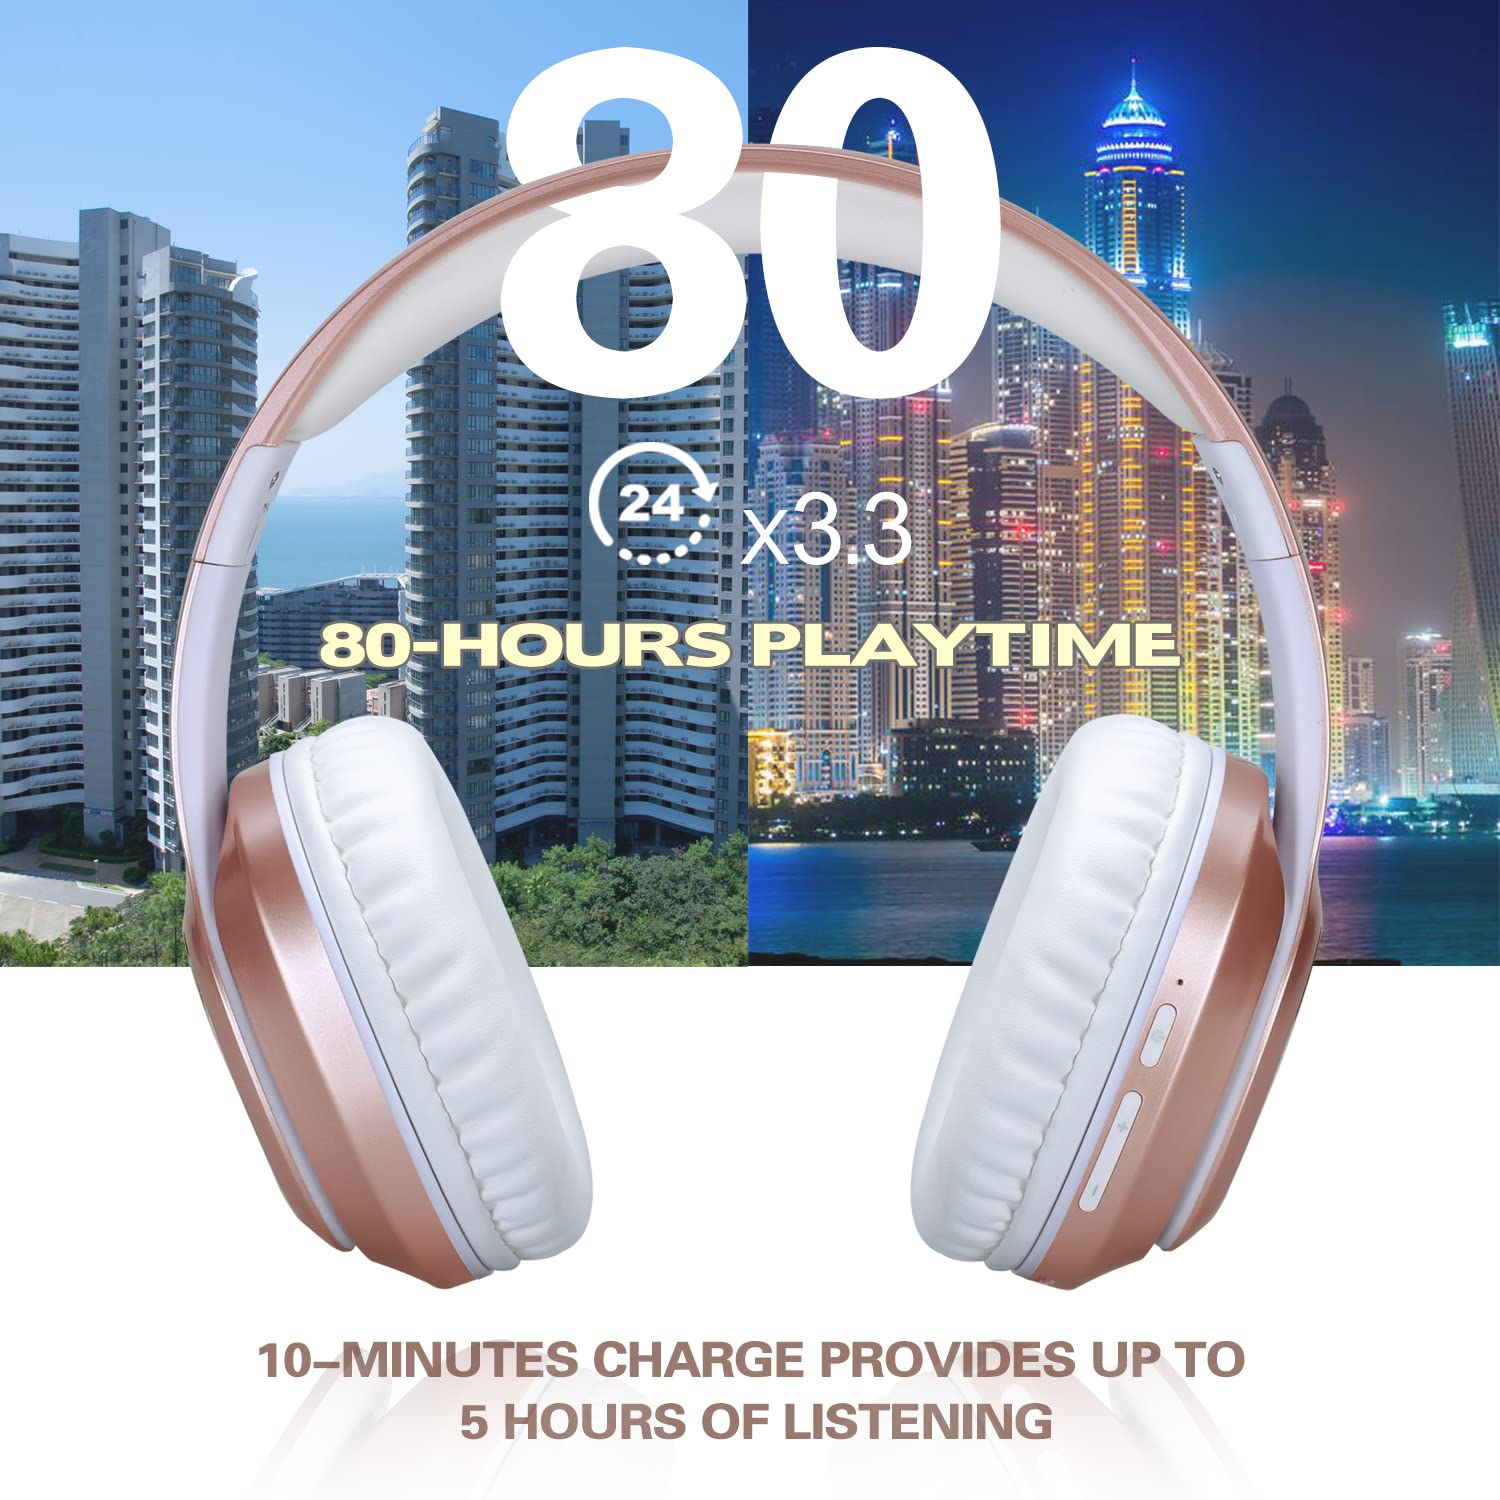 WorWoder Bluetooth Headphones Over Ear, [80 Hrs Playtime] Wireless Headphones, Foldable Hi-Fi Stereo, Soft Memory Protein Earmuffs, Built-in Microphone ＆ Wired Mode for Cellphone PC (Rose Gold)